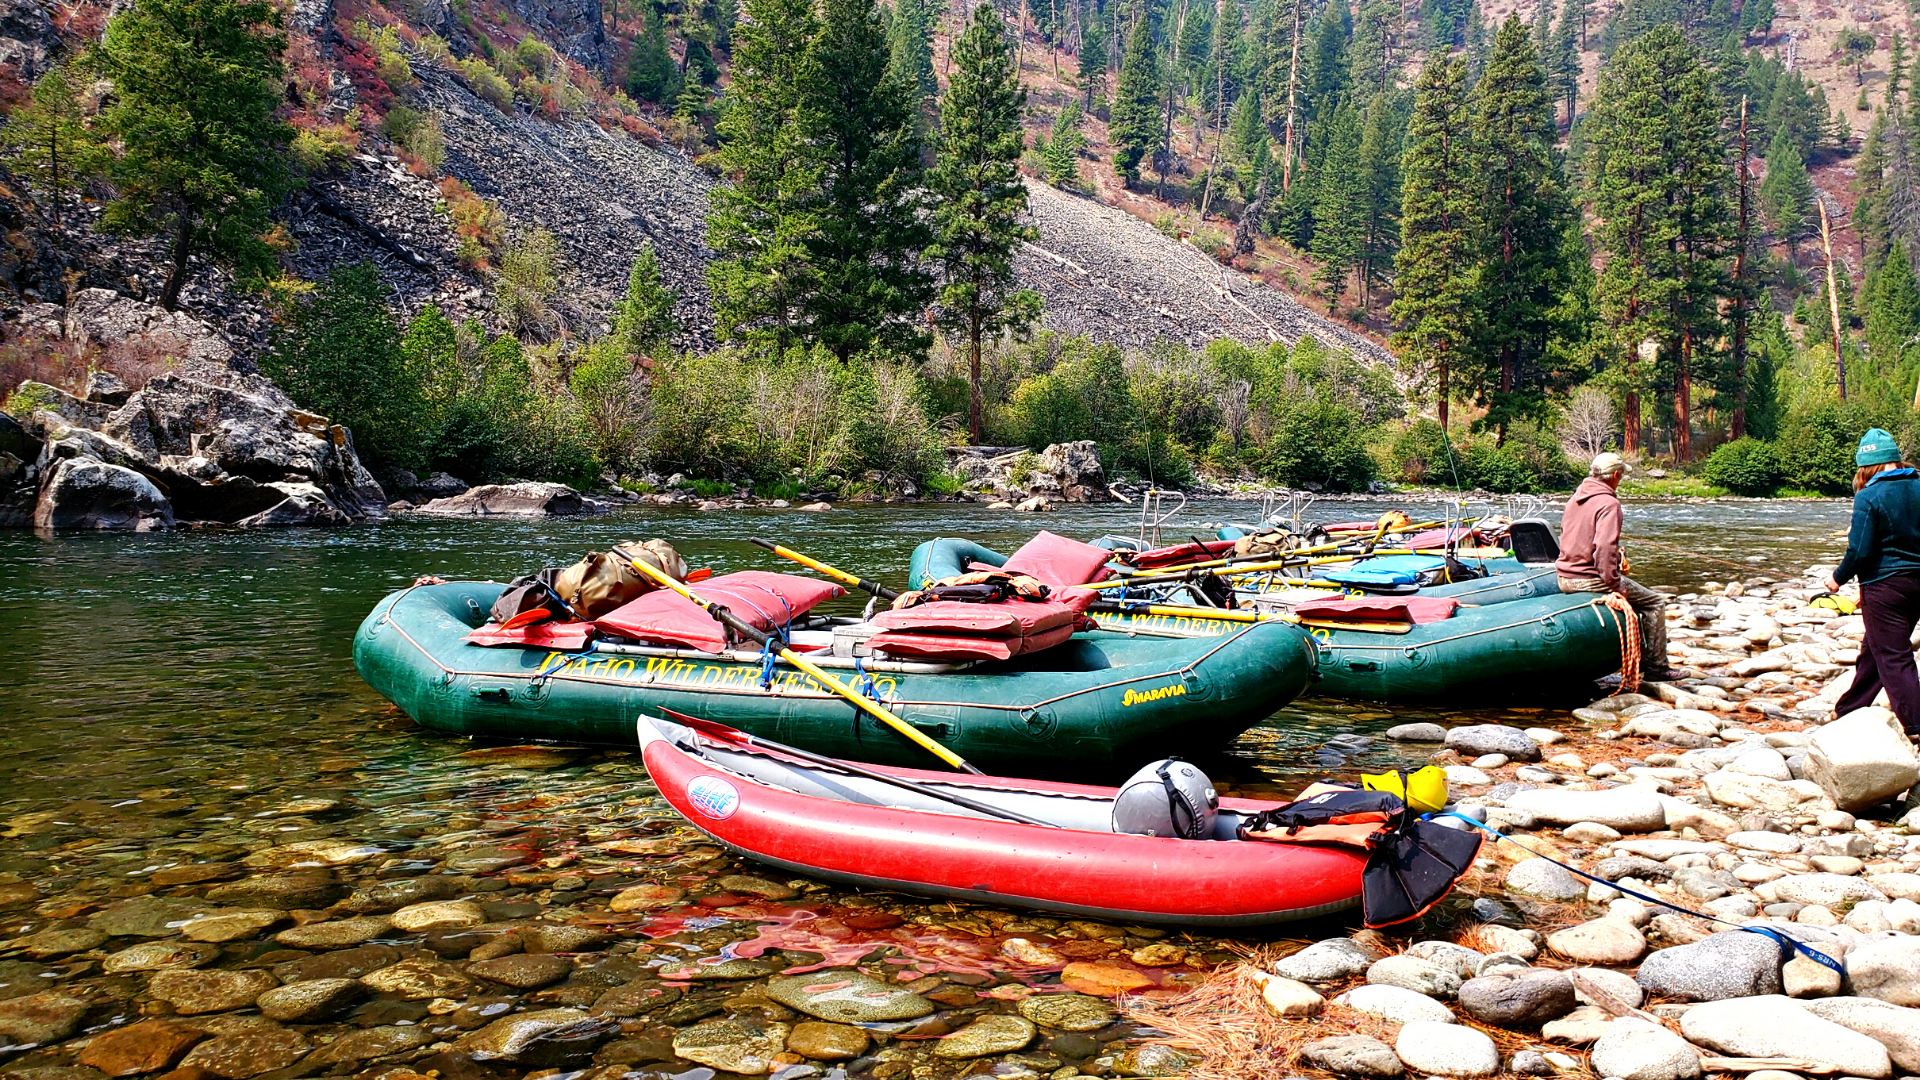 Rafts are readied with gear for guests to enjoy a day rafting down the Middle Fork of the Salmon River.